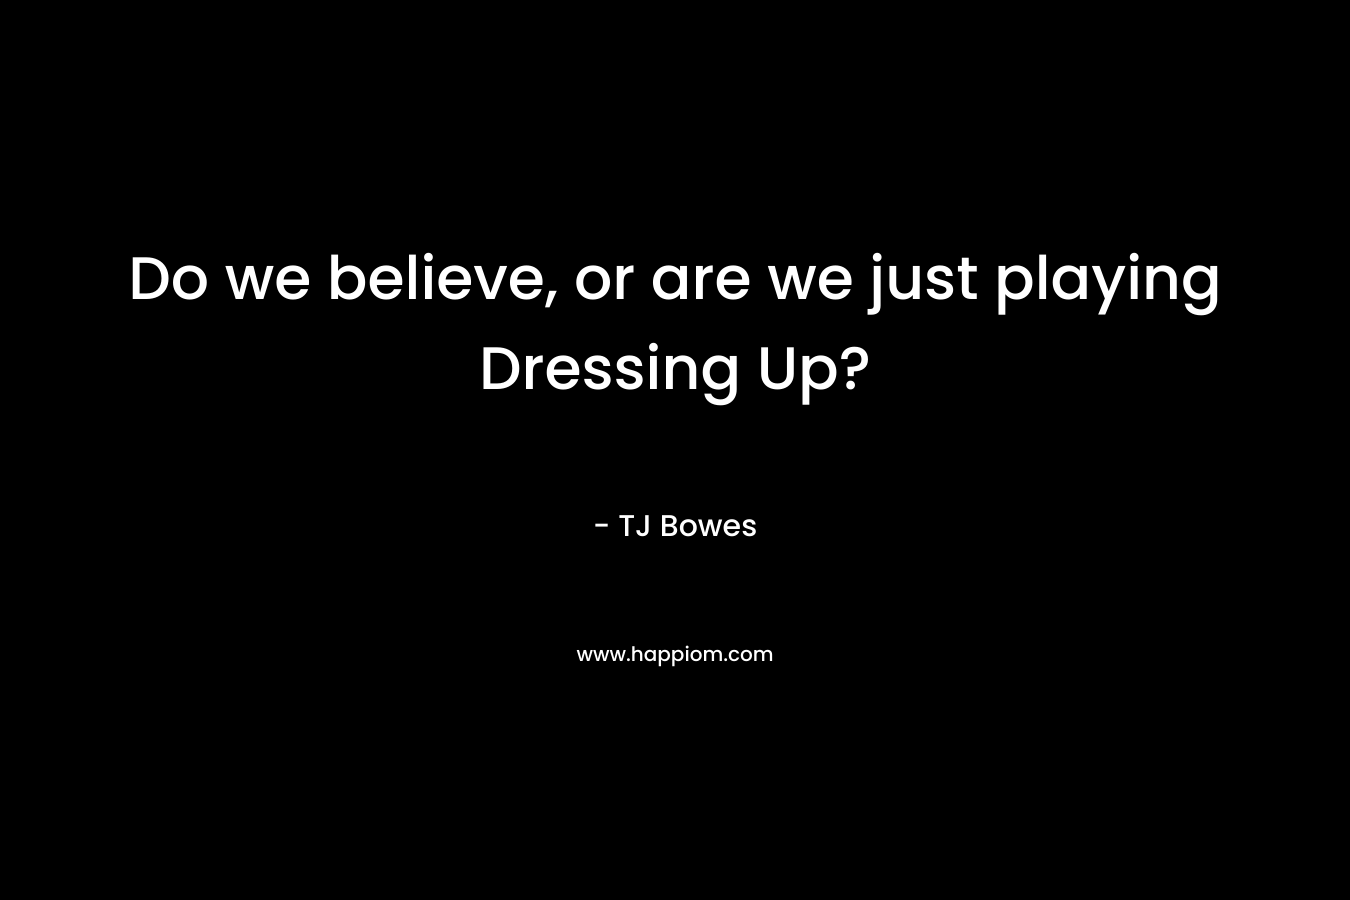 Do we believe, or are we just playing Dressing Up? – TJ Bowes